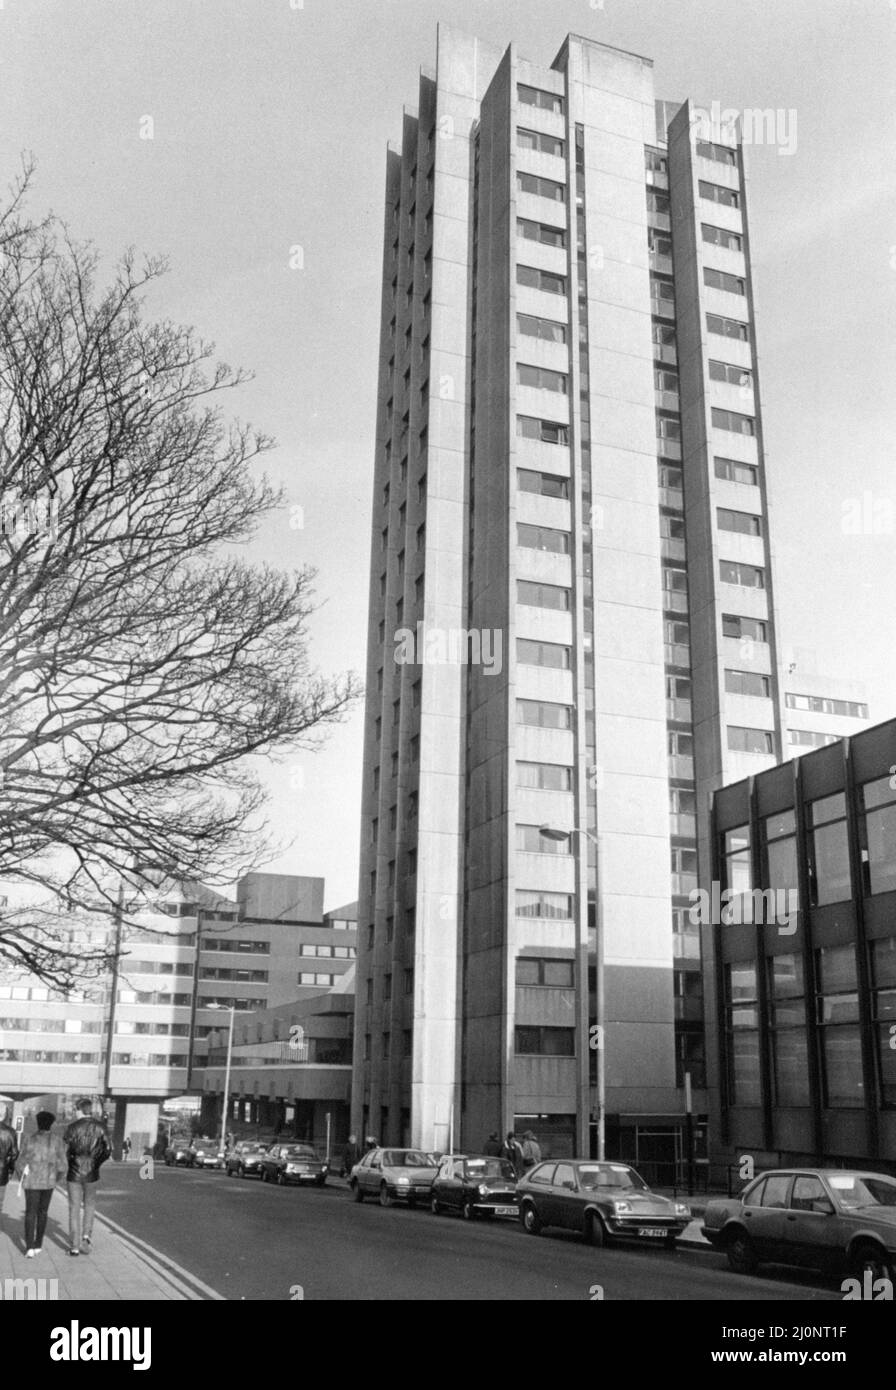 Priory Hall, Lanchester Polytechnic Halls of Residence, Coventry,  7th December 1983. Stock Photo